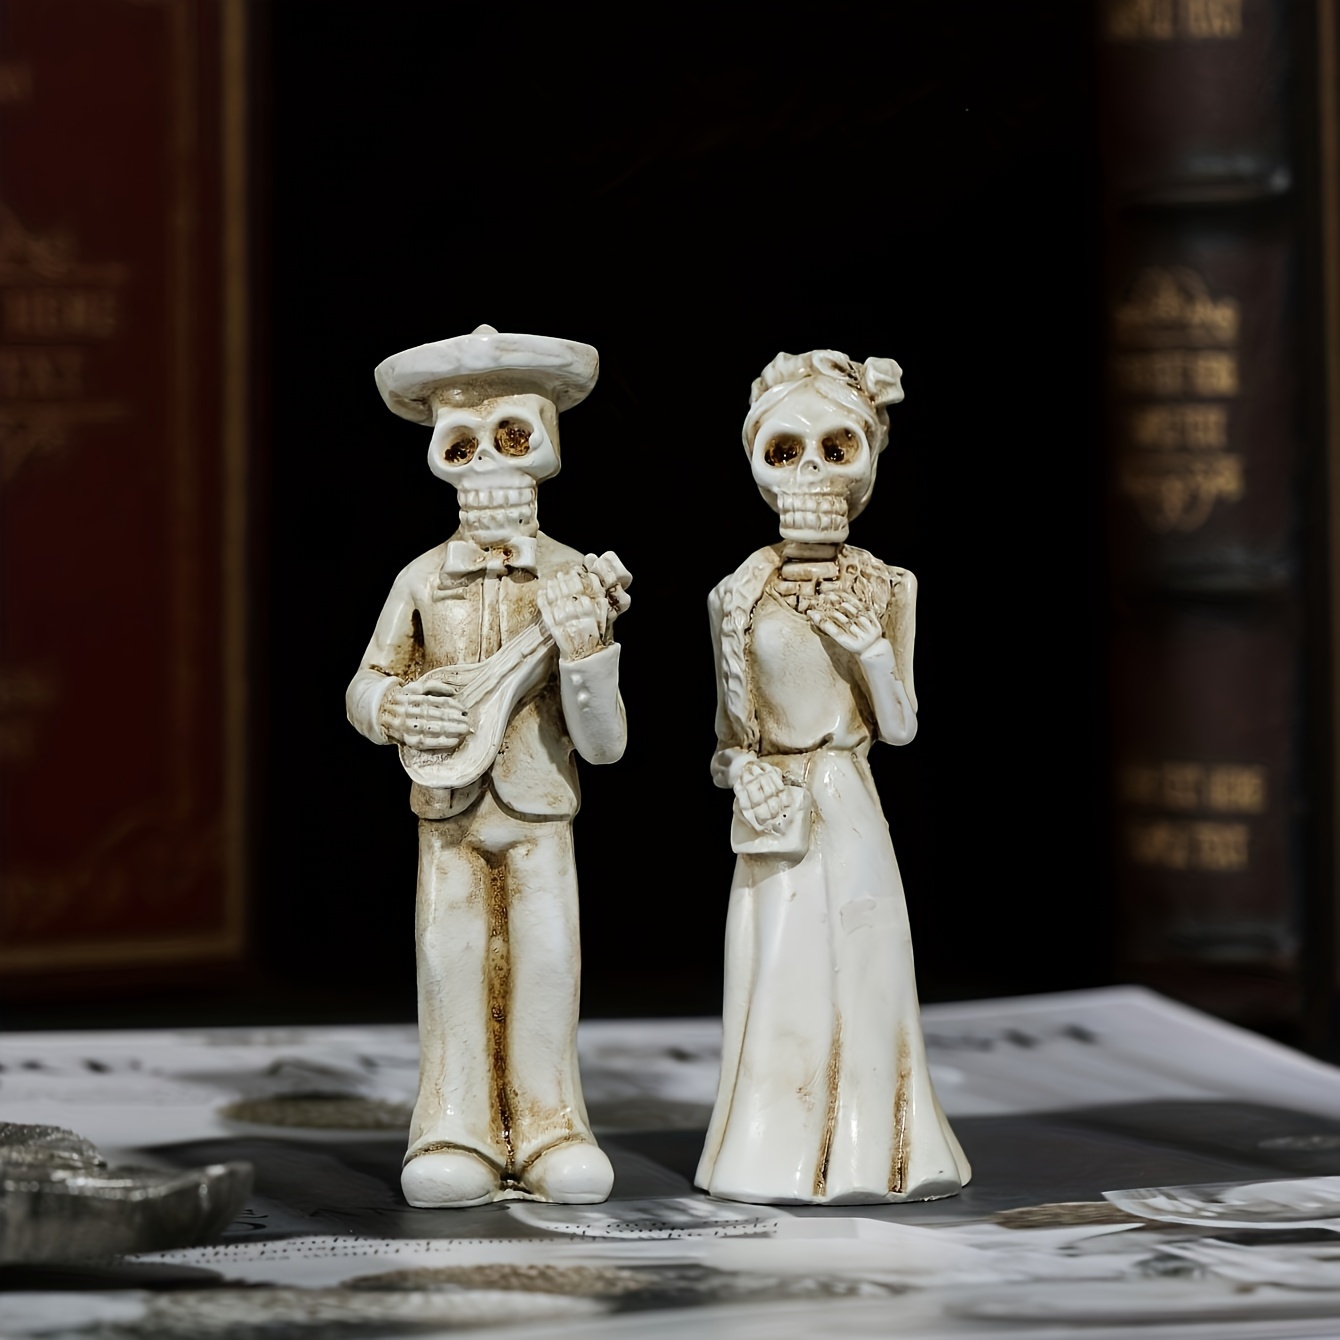 

Classic Resin Couple Decorative Figurines - Perfect For Halloween Decorating